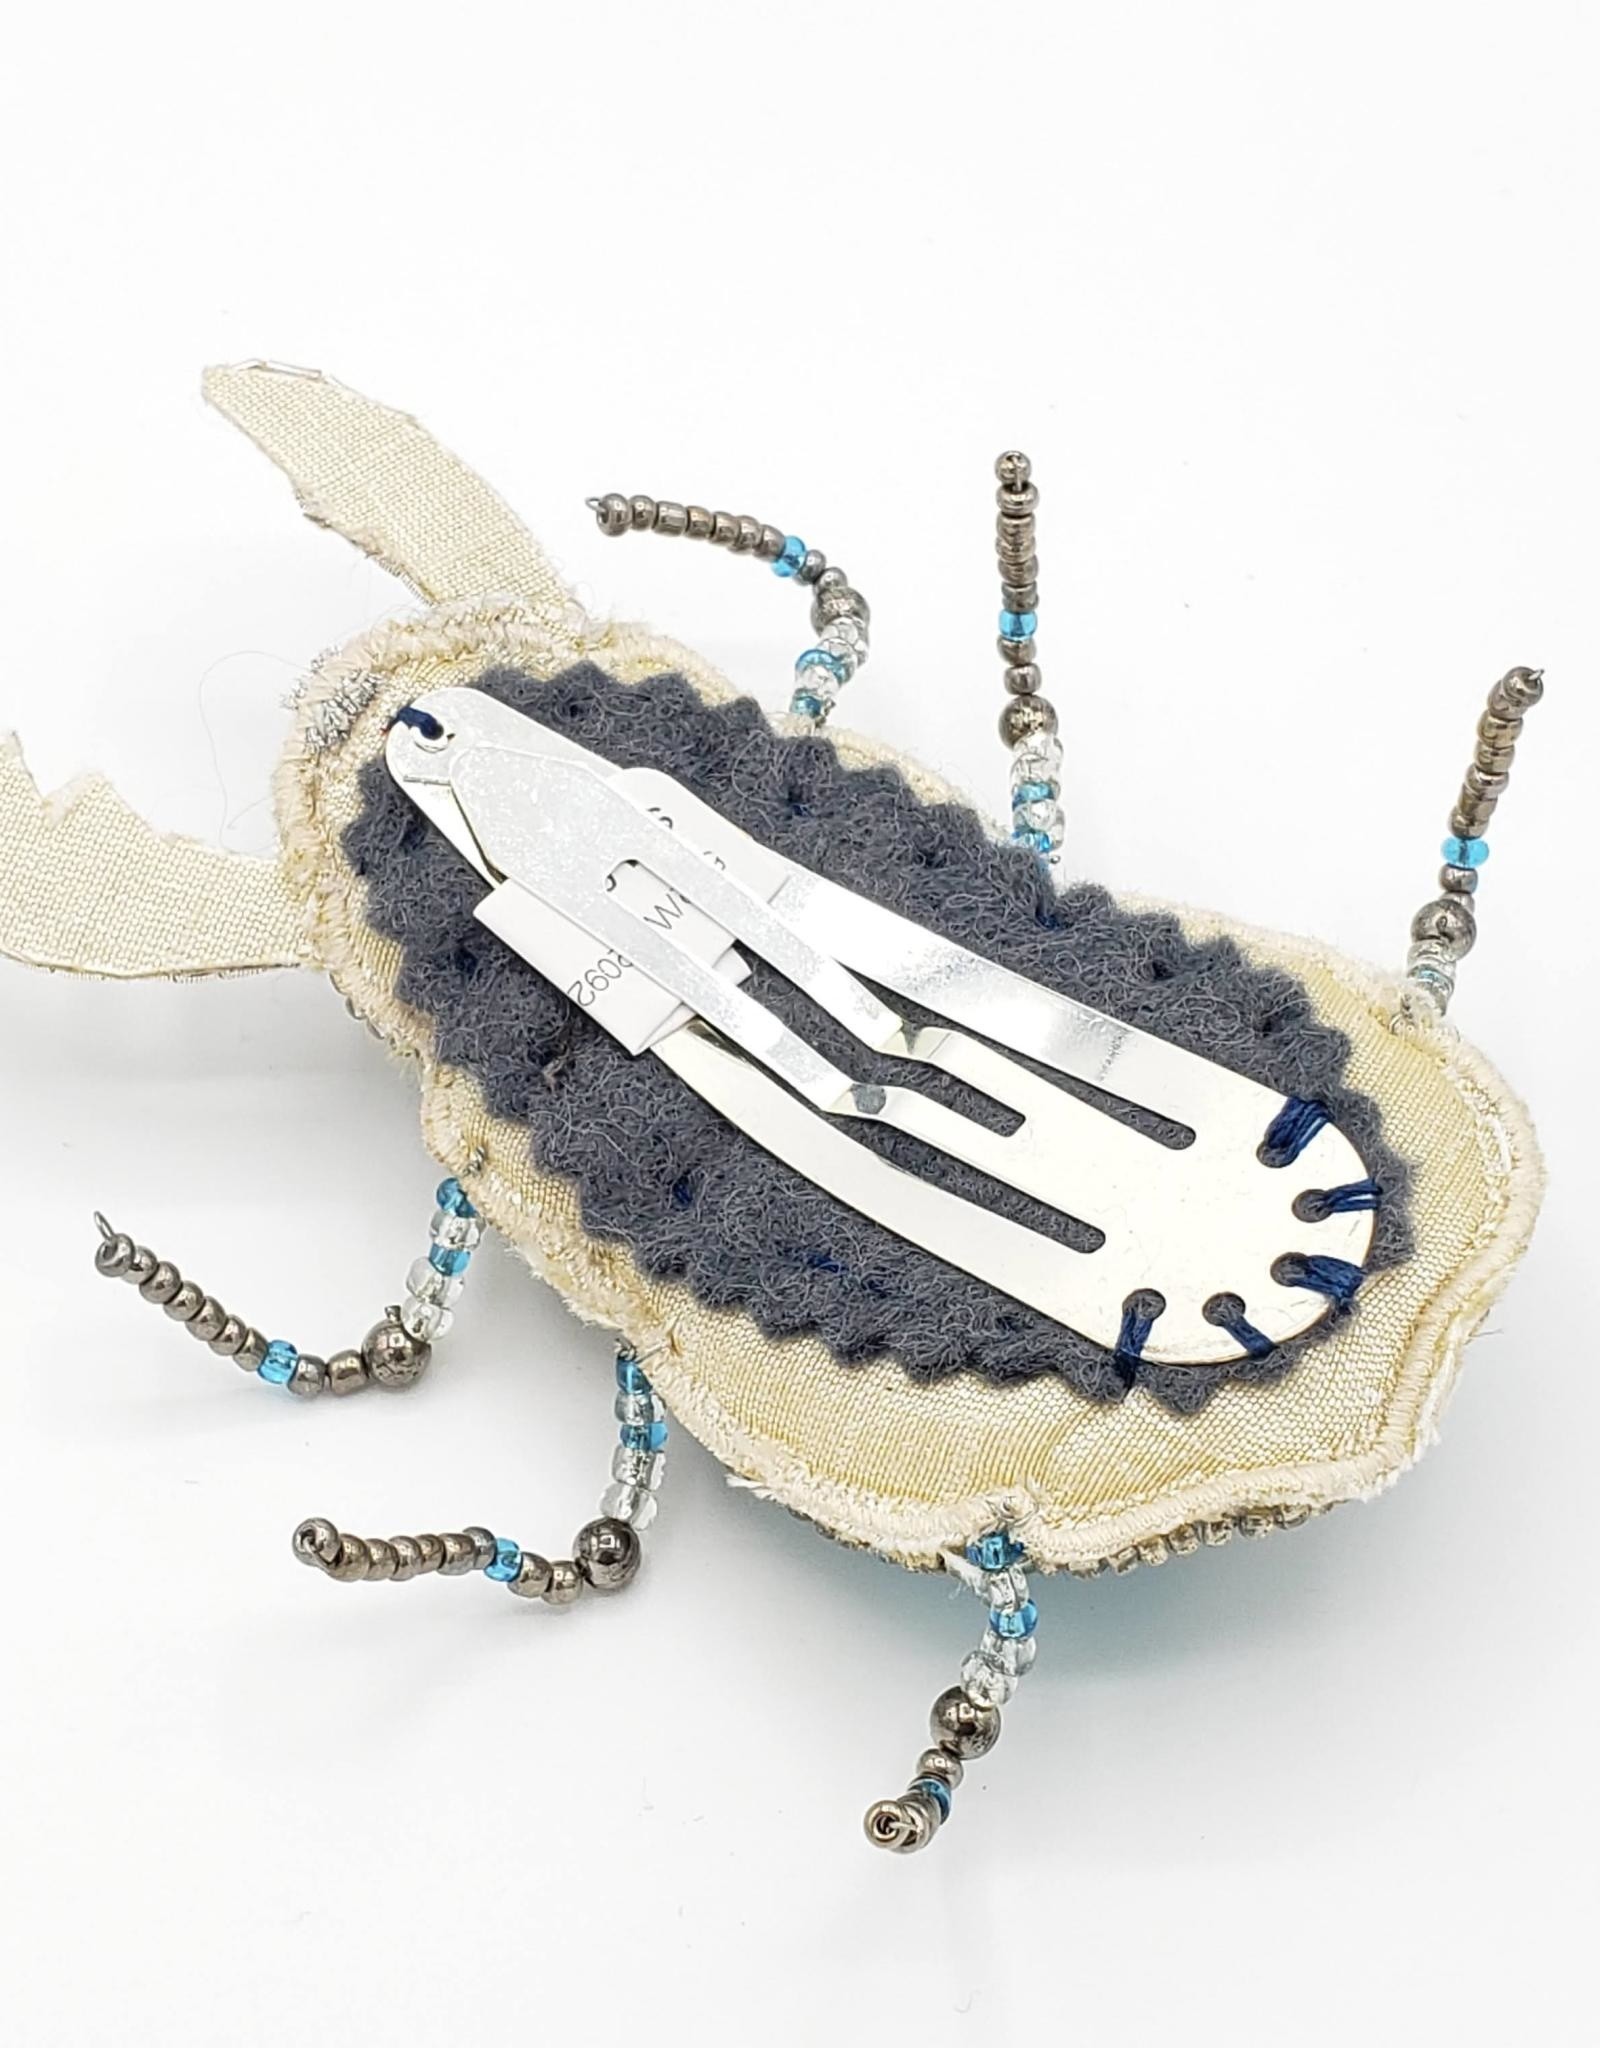 Beaded Jeweled Insect Barrette